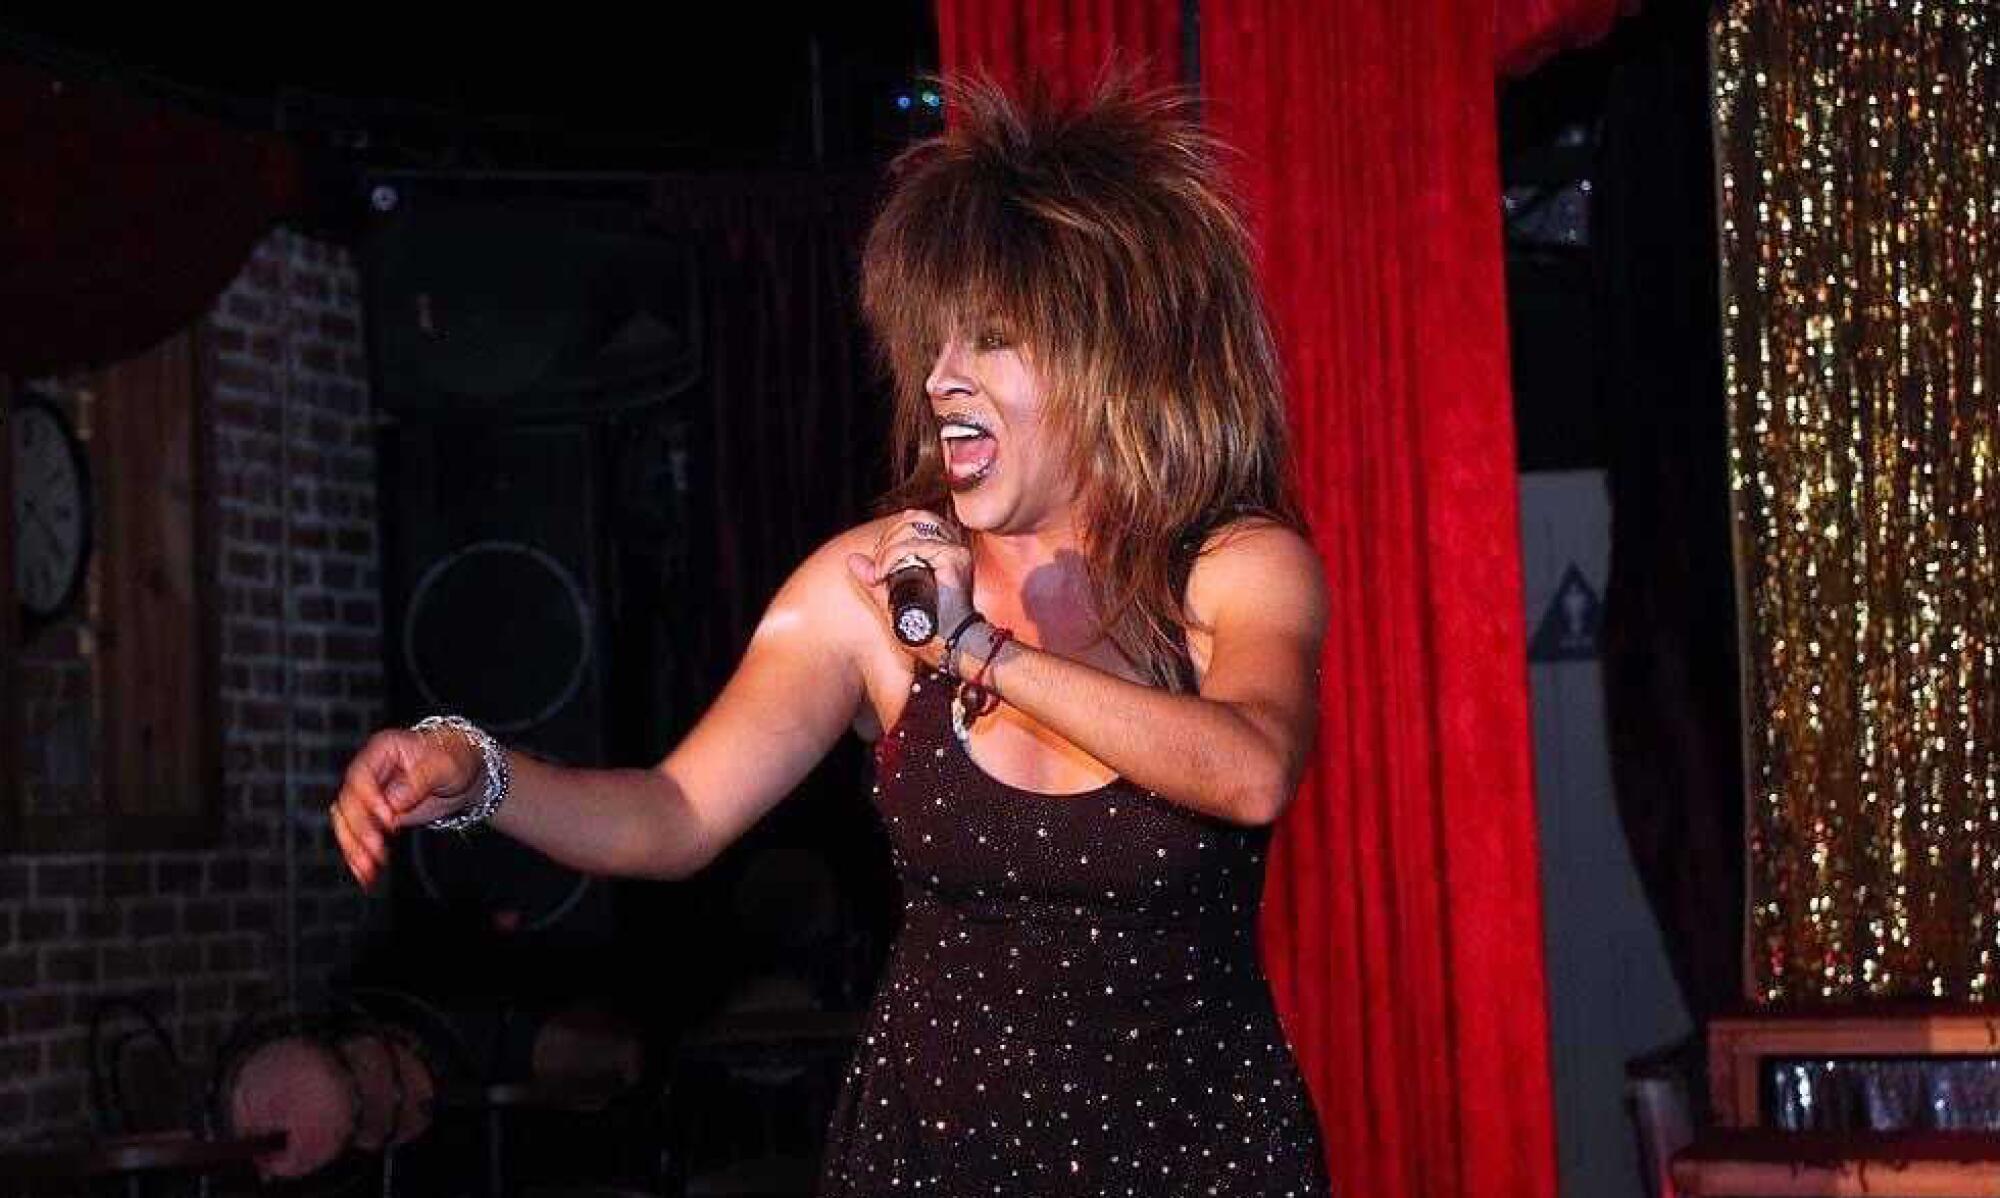 Patty La Tres Pisos performs as Tina Turner during a drag show at the New Jalisco Bar.